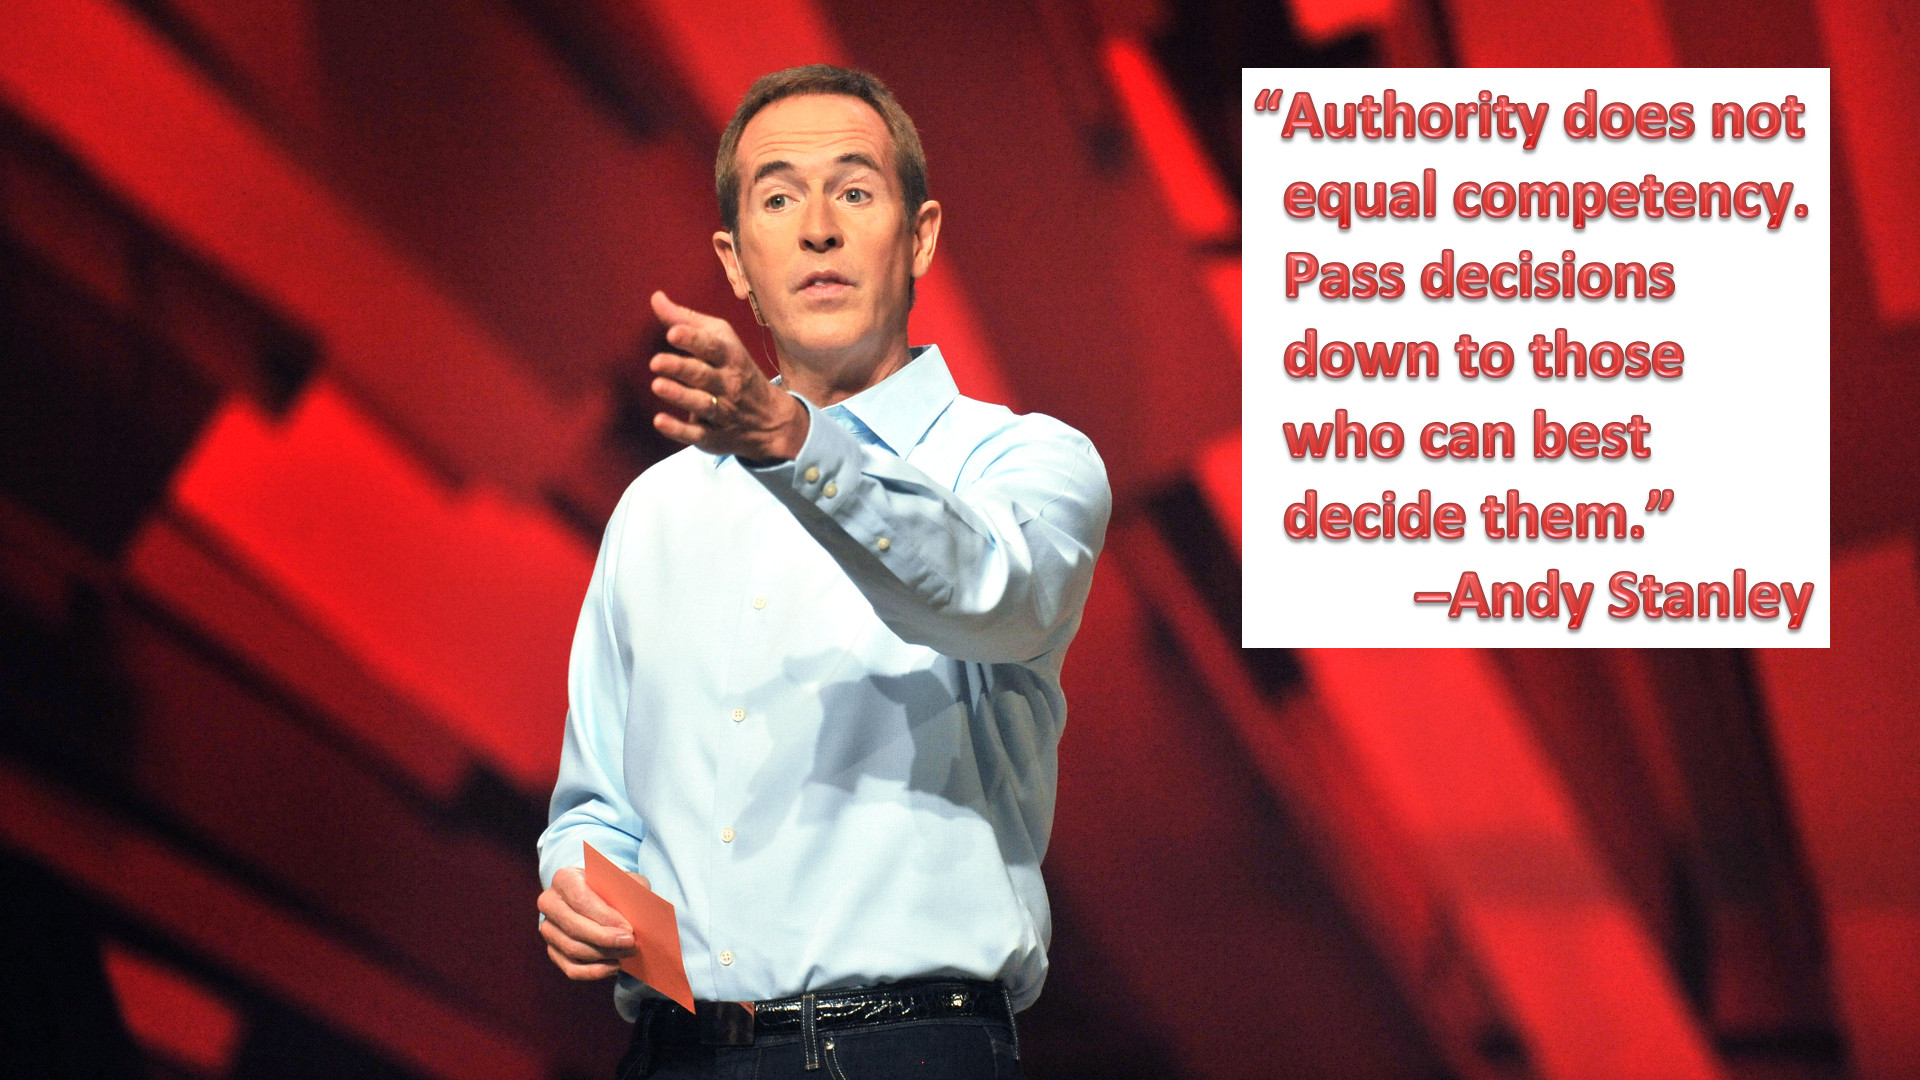 Andy Stanley Leadership Quotes
 Best Leadership Speaker Quotes from Leadercast